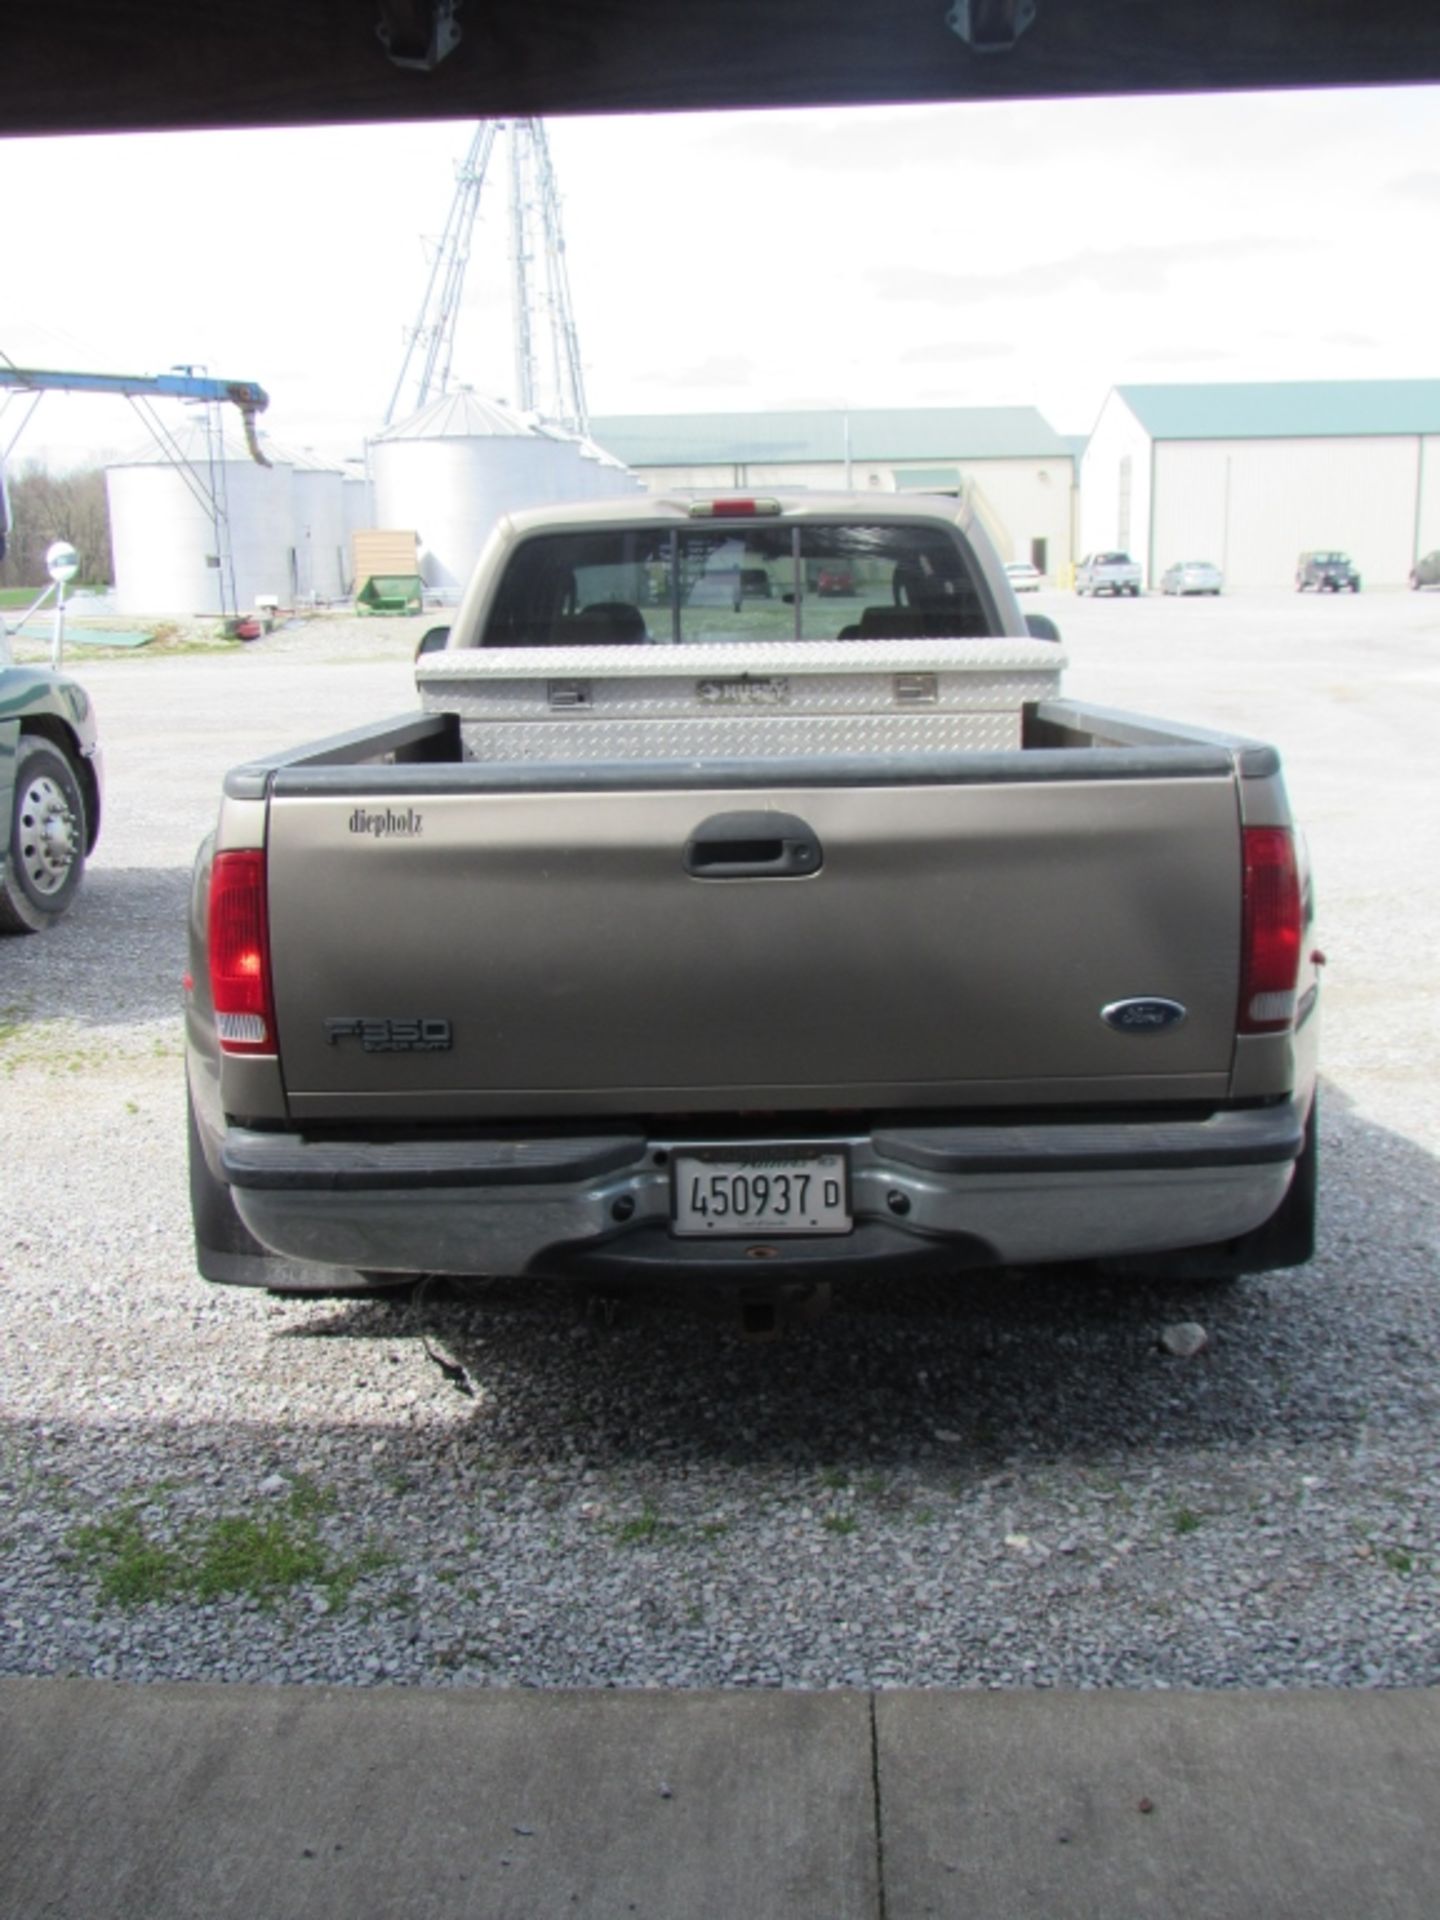 2004 Ford F-350 XLT 2wd 6.0L Powerstroke Diesel Engine - Image 17 of 22